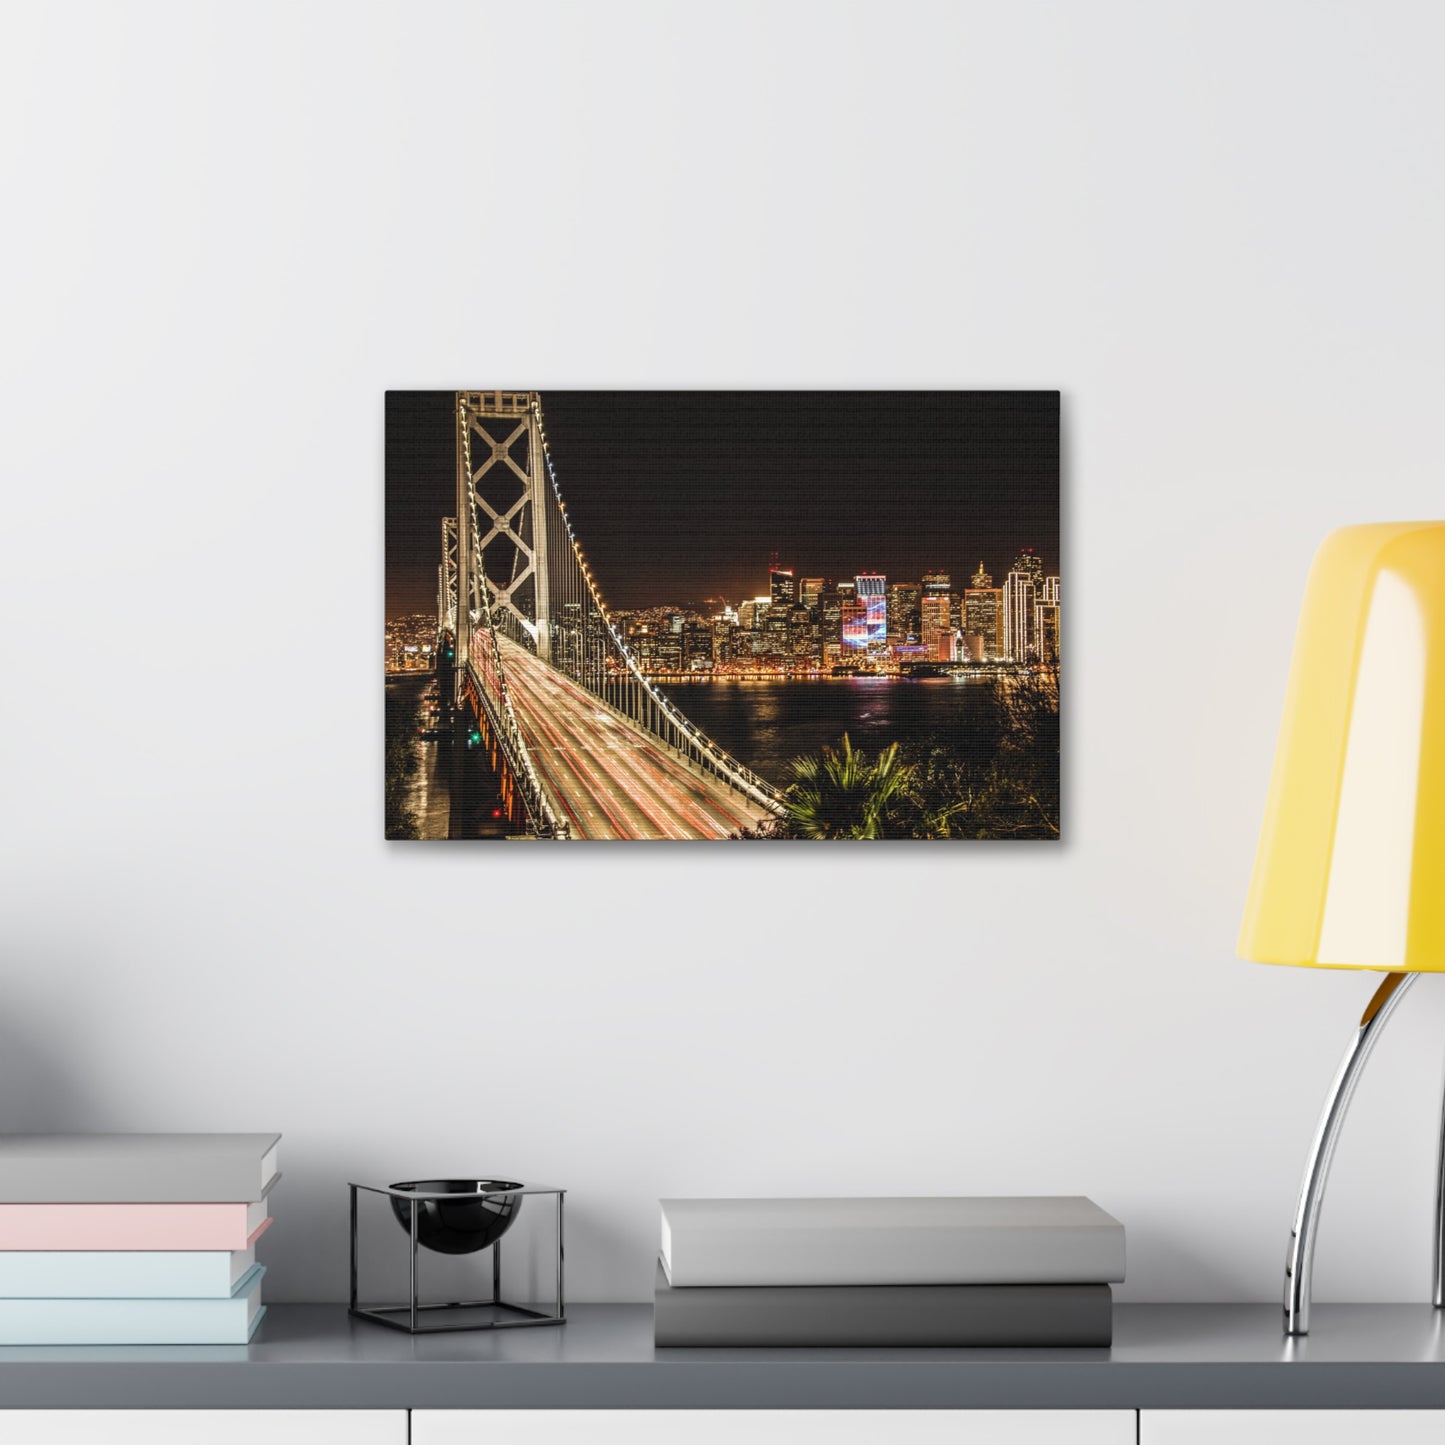 Canvas Print Of The Bay Bridge And Skyline In San Francisco For Wall Art